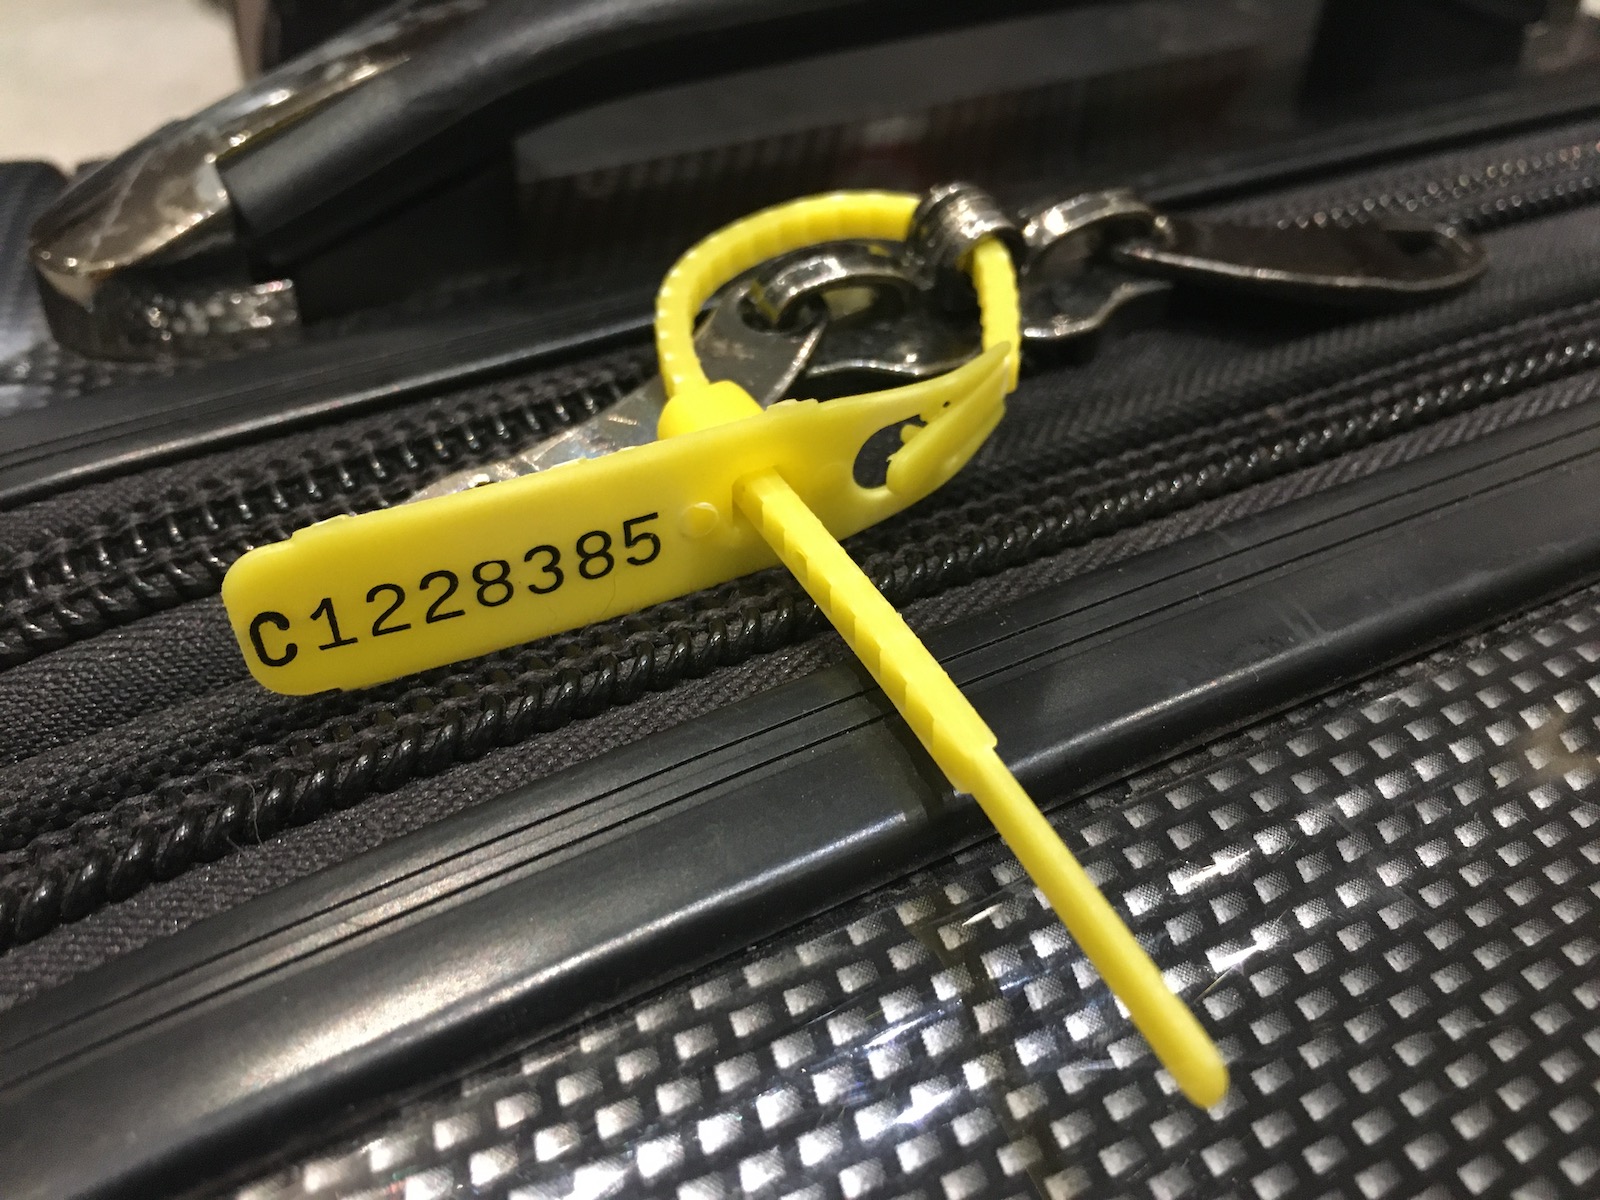 Numbered zip ties to see if someone opened your checked bag